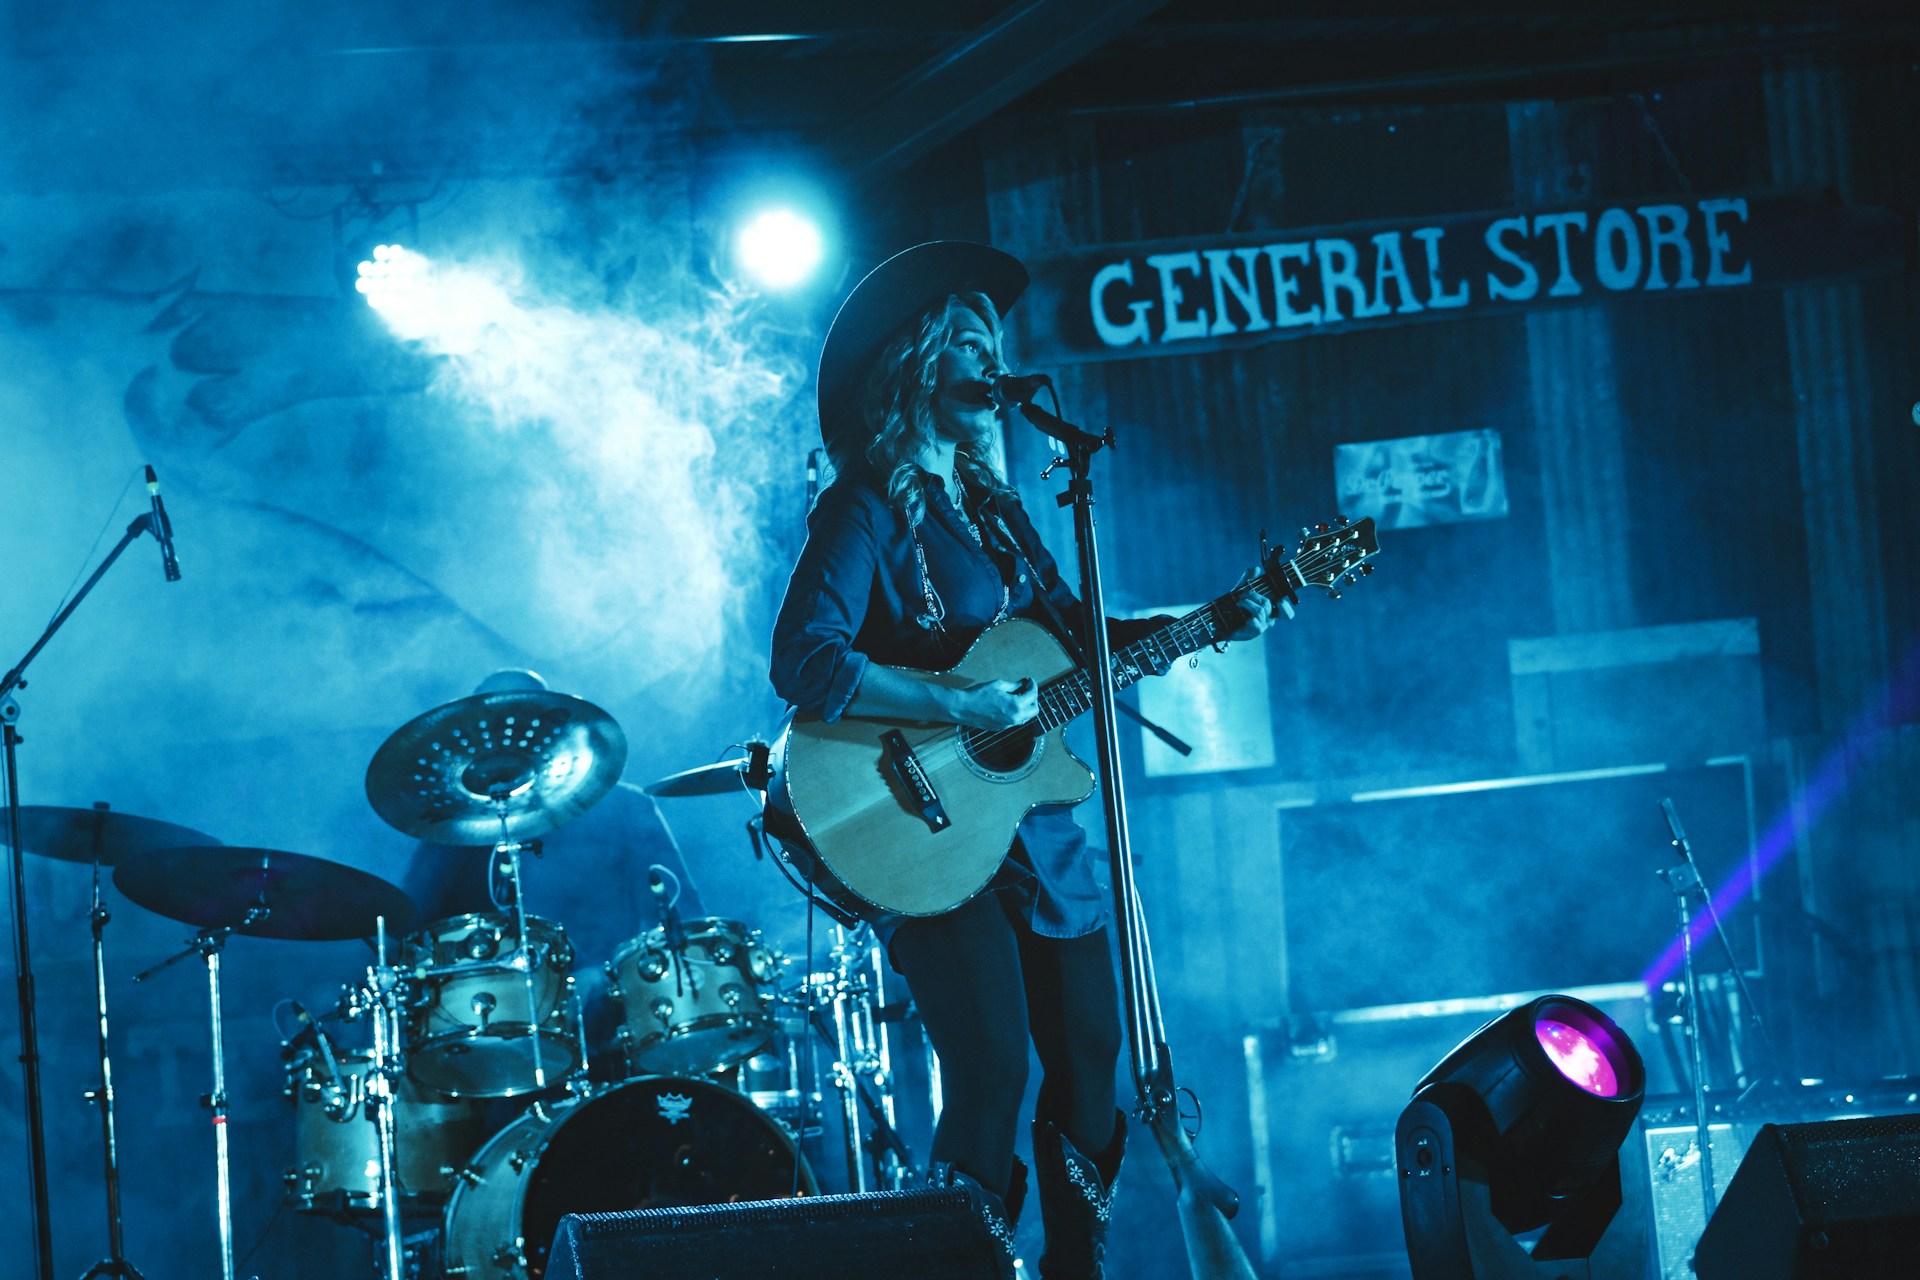 A female country singer playing guitar with her band on a blue lit stage.